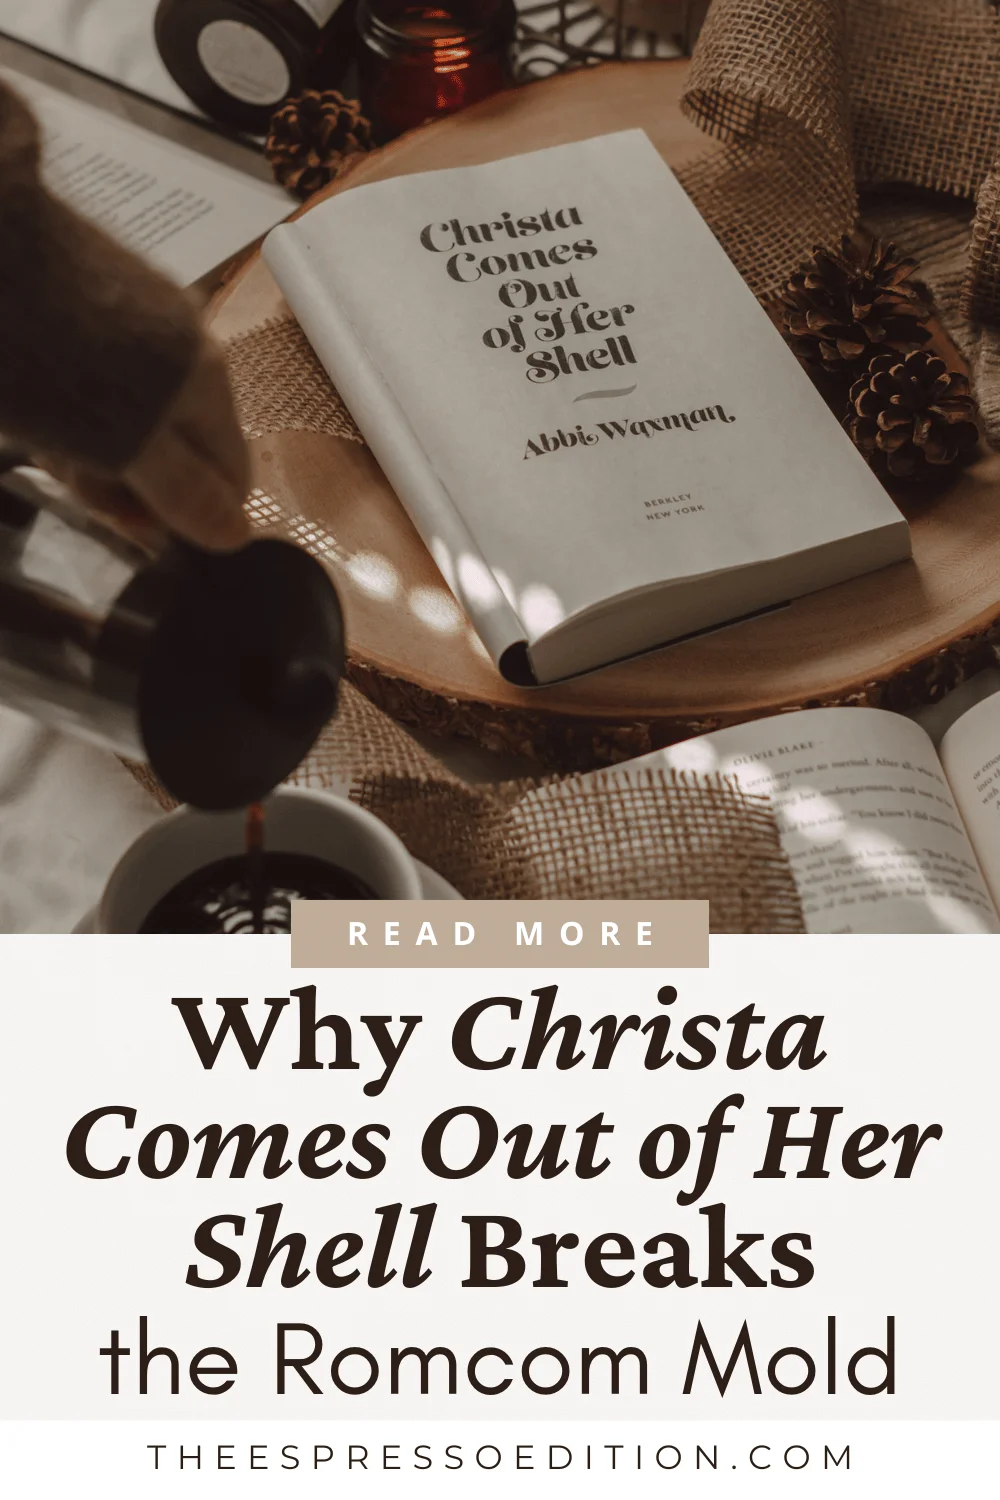 Why “Christa Comes Out of Her Shell” Breaks the Romcom Mold by The Espresso Edition cozy bookish blog